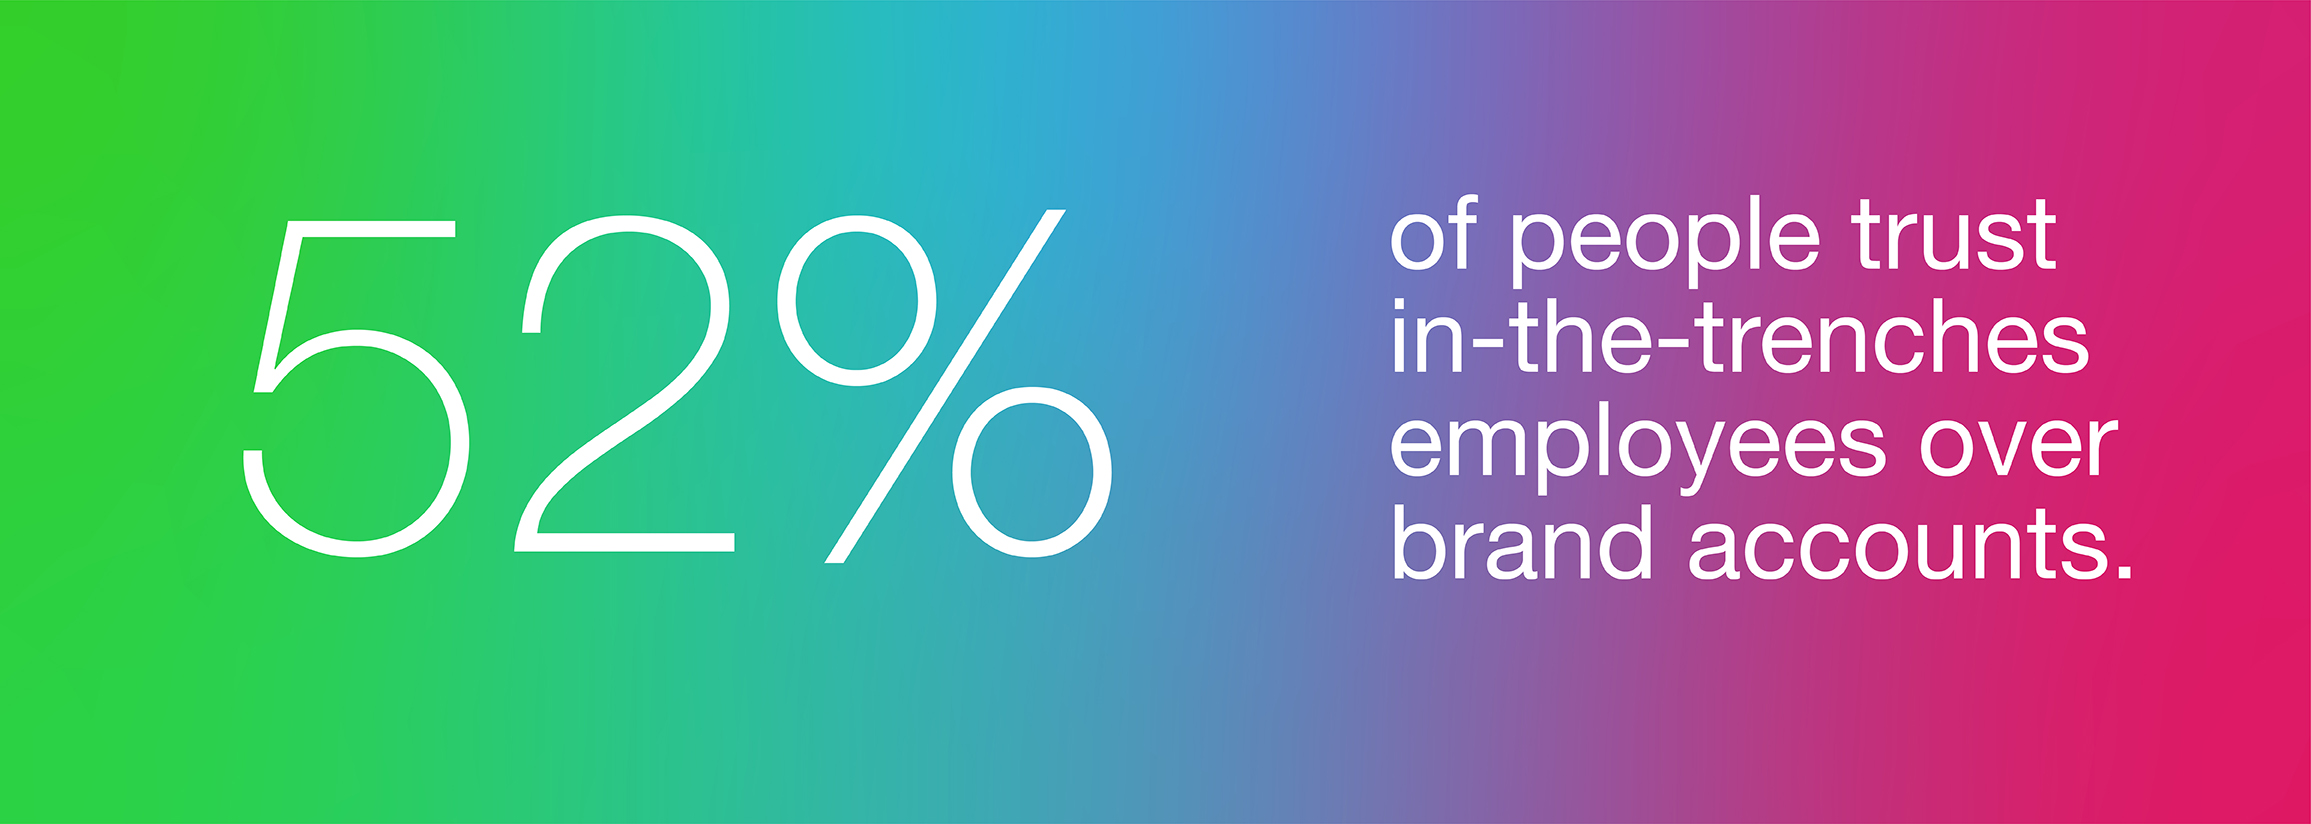 52% of people trust in-the-trenches employees over brand accounts.